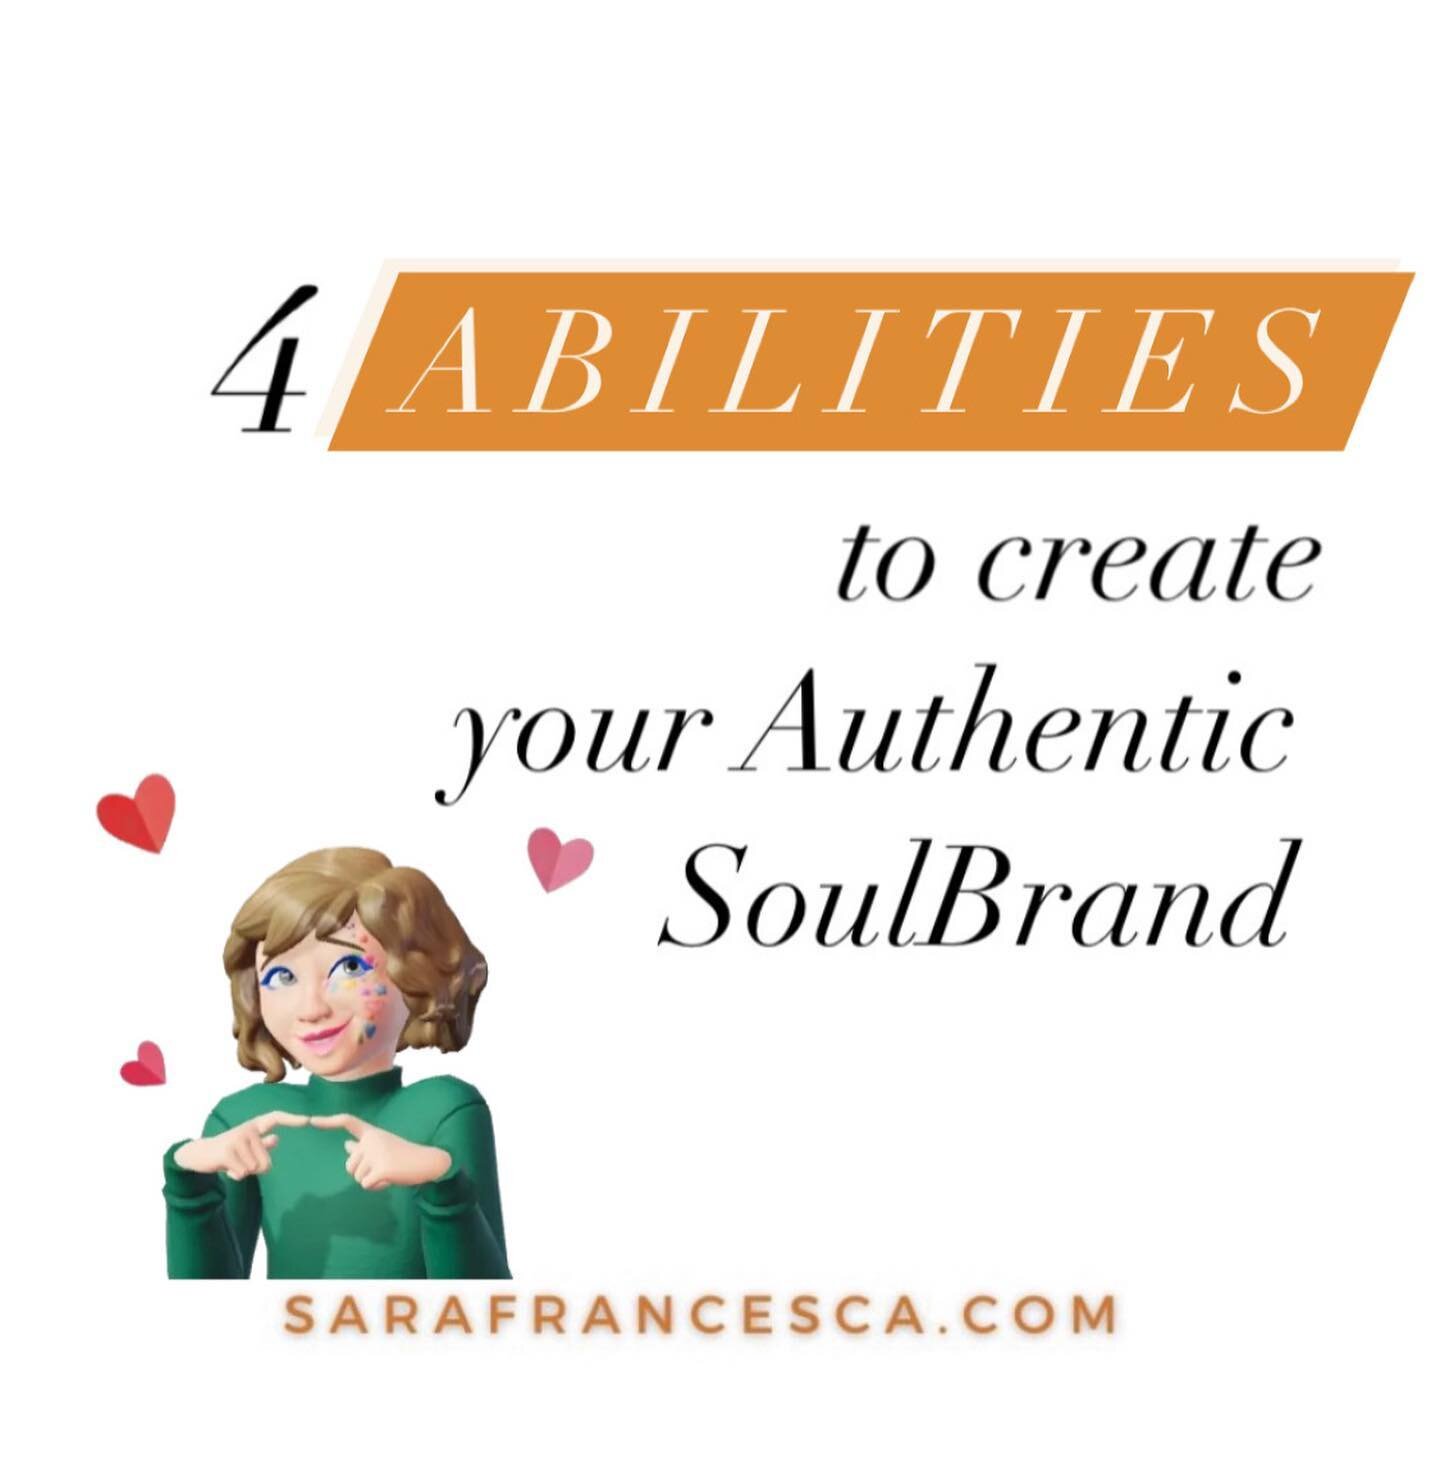 These are 4 abilities that can transform your Soulpreneur Journey. They&rsquo;ll support you to share your authentic message in the world while building (or rather *m a g n e t i z i n g*) your amazing SoulTribe community! 

🙏🏻💜 Always focus on wh